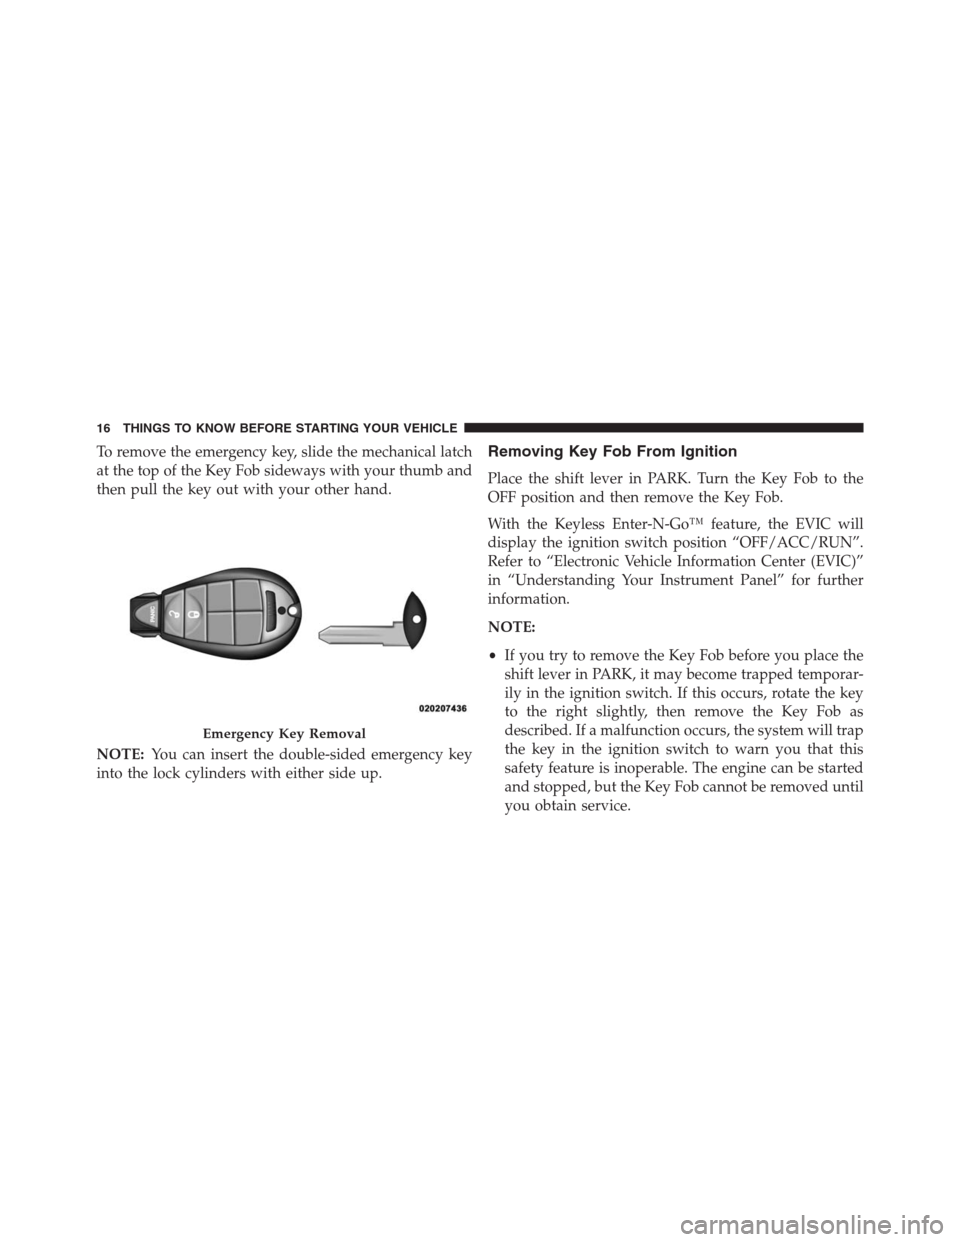 JEEP GRAND CHEROKEE 2013 WK2 / 4.G Owners Manual To remove the emergency key, slide the mechanical latch
at the top of the Key Fob sideways with your thumb and
then pull the key out with your other hand.
NOTE:You can insert the double-sided emergenc